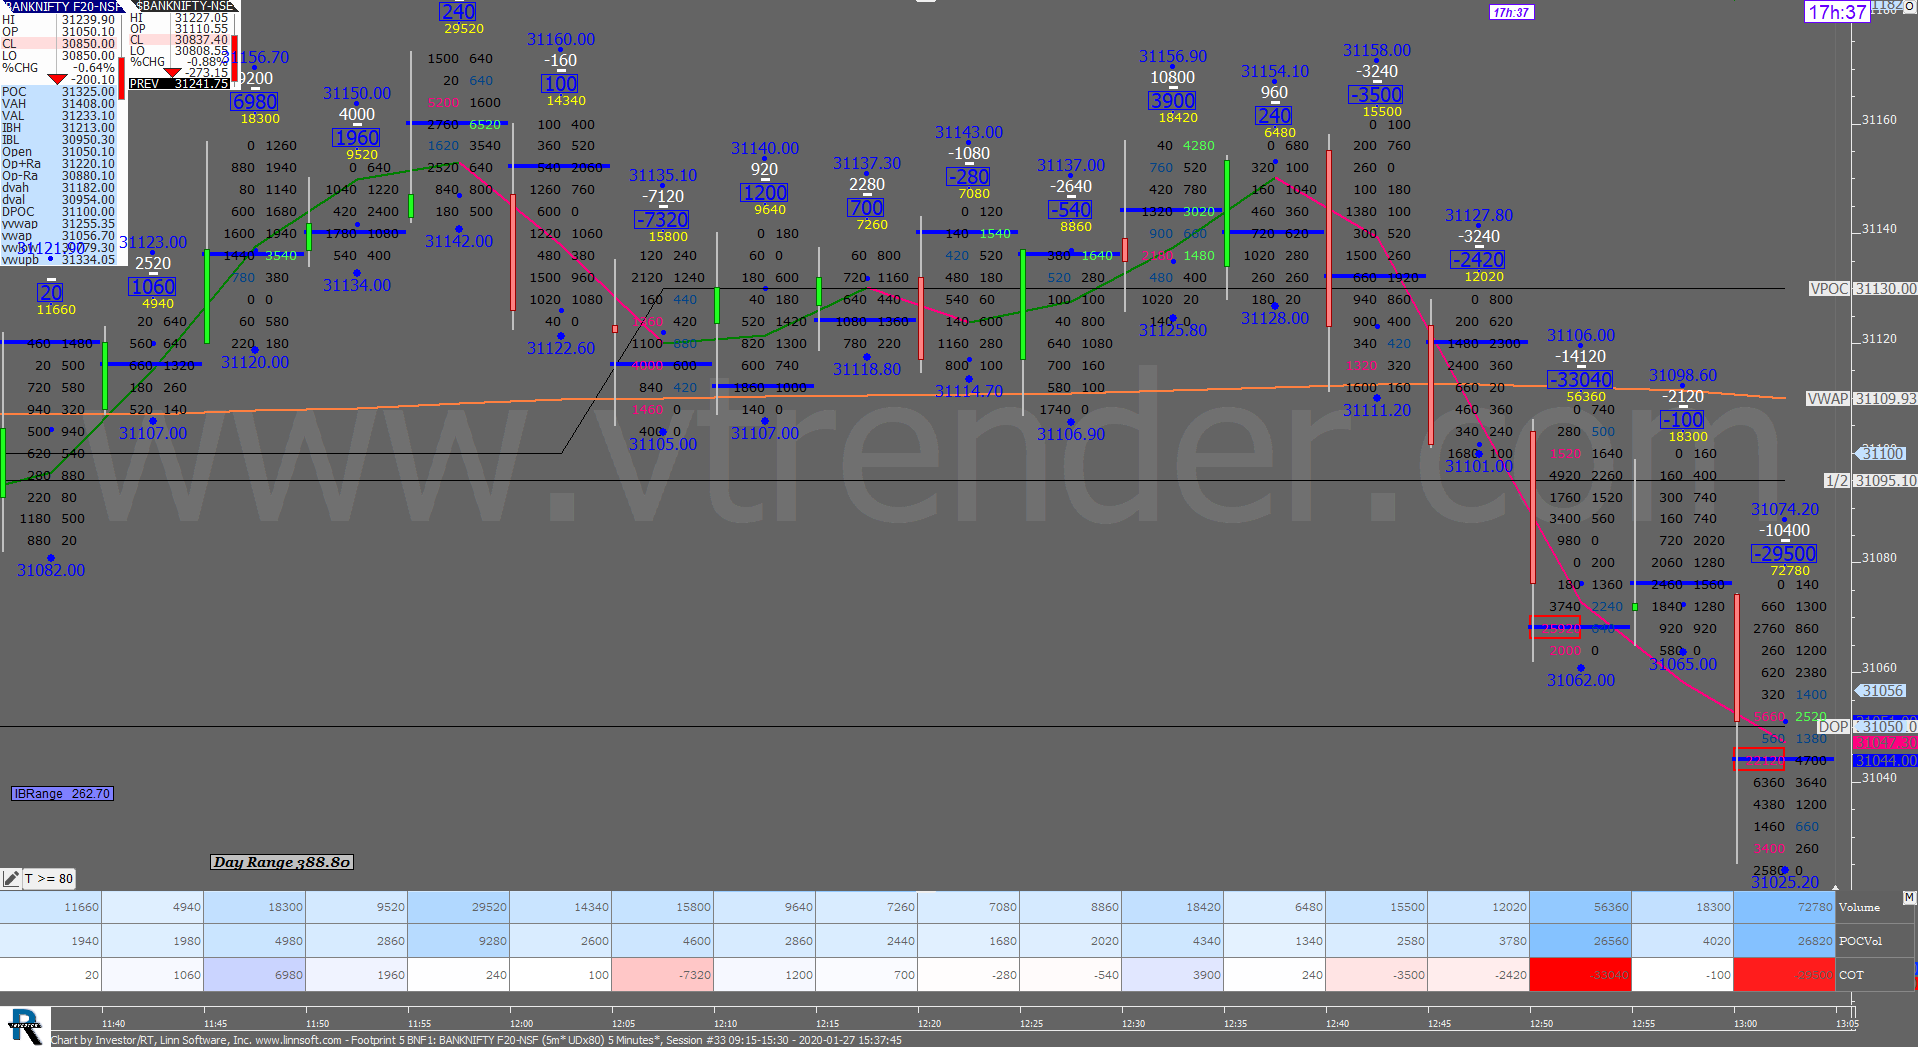 3 34 Order Flow Charts Dated 27Th Jan 2020 (5 Mins) Banknifty Futures, Day Trading, Intraday Trading, Intraday Trading Strategies, Nifty Futures, Order Flow Analysis, Support And Resistance, Trading Strategies, Volume Profile Trading